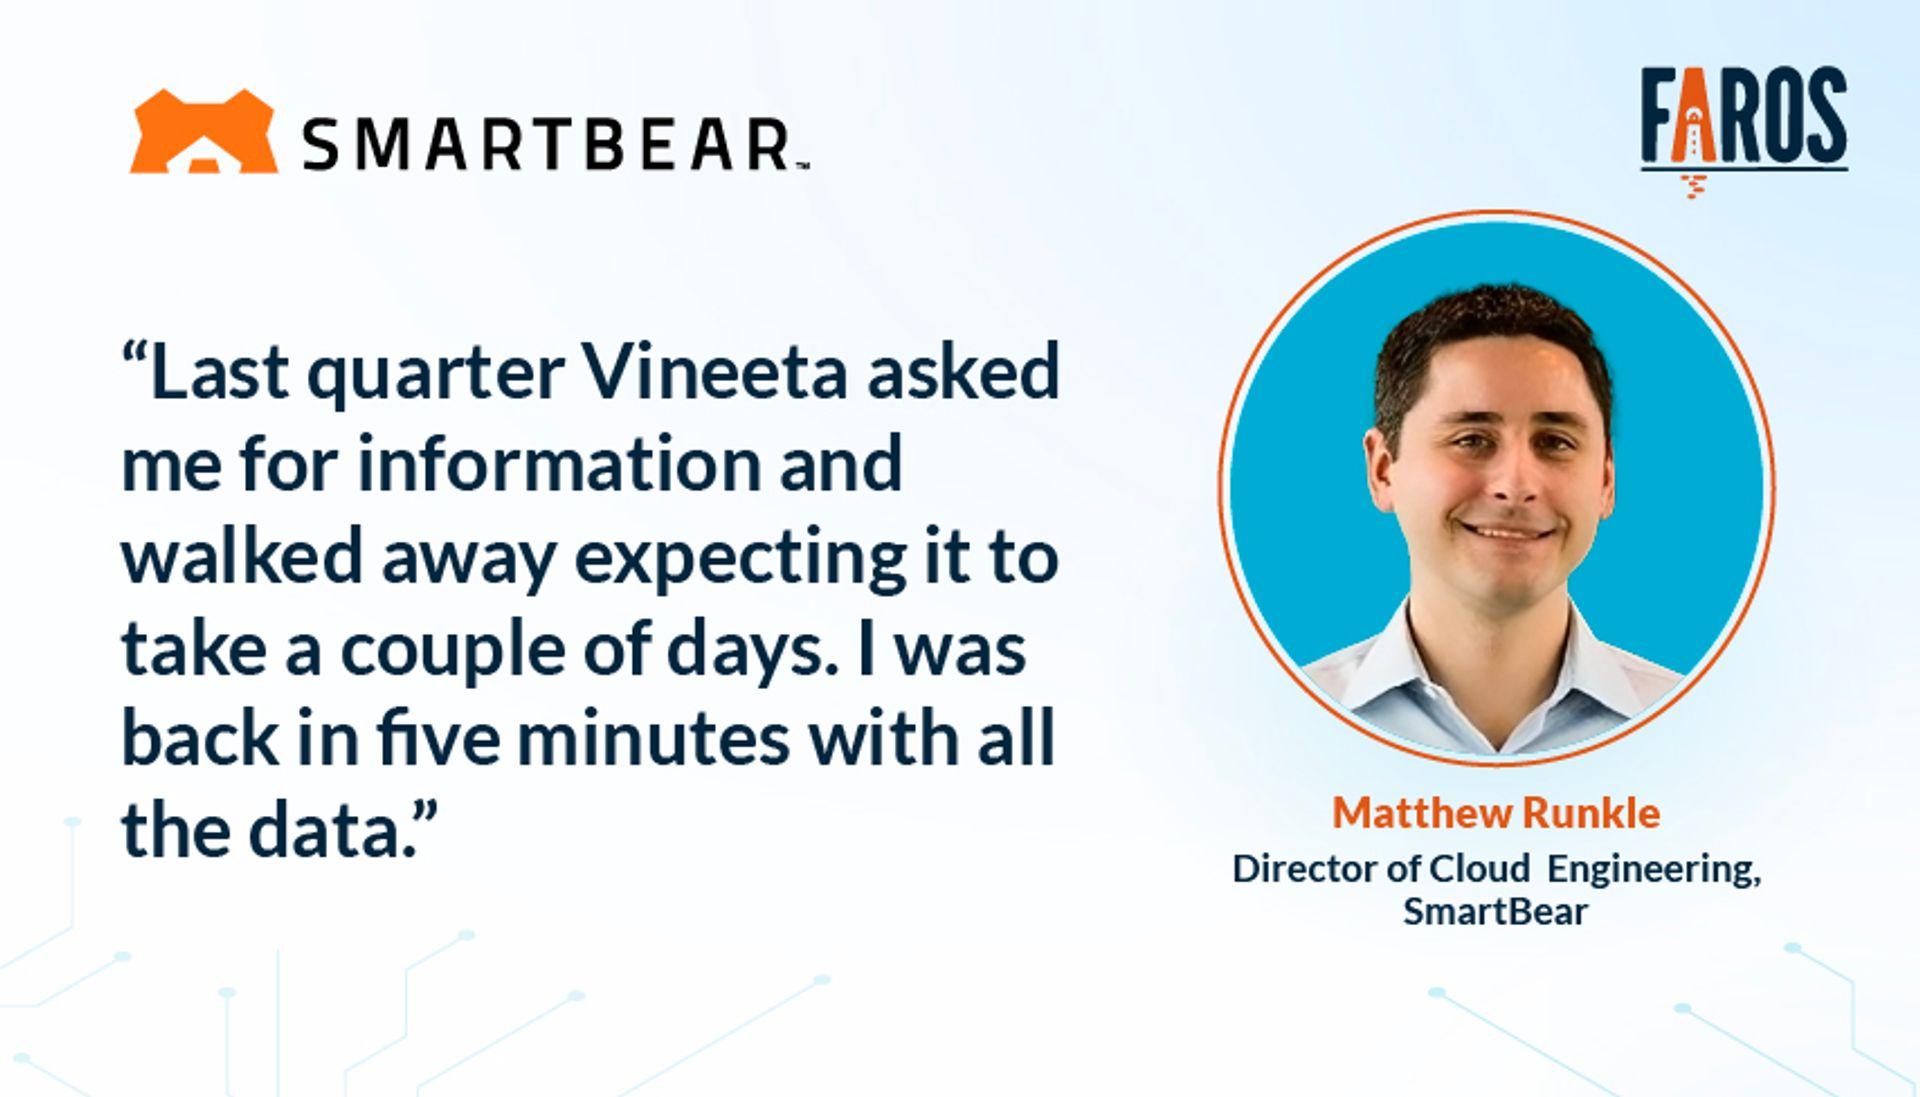 Image features a quote by Matthew Runkle, Director of Cloud Engineering at SmartBear saying "Last quarter Vineeta asked me for information and walked away expecting it to take a couple of days. I was back in five minutes with all the data."